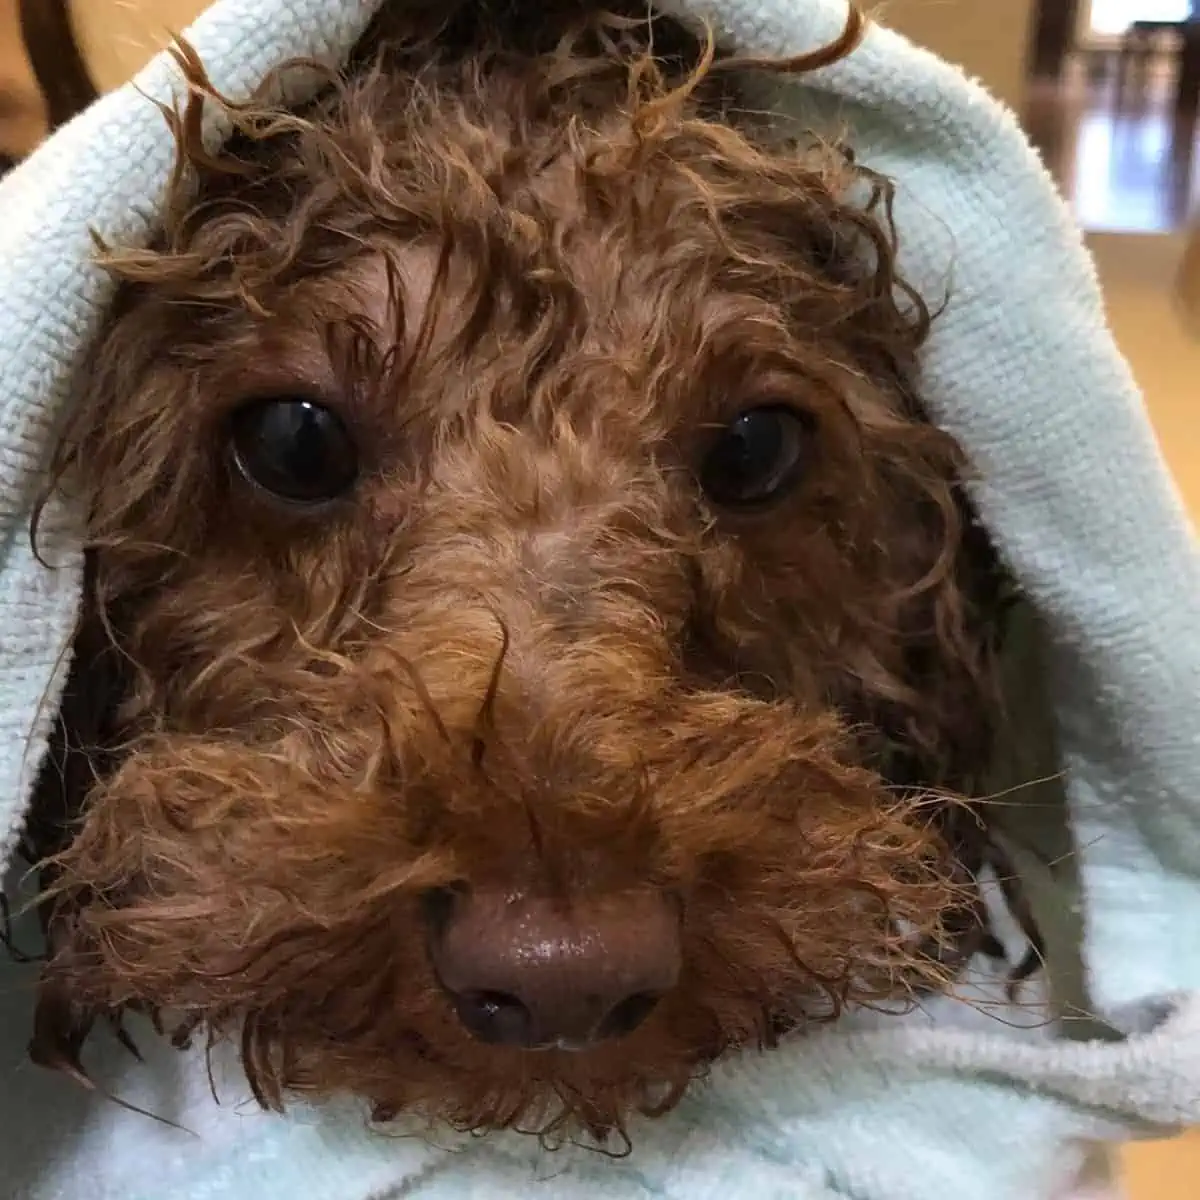 towel-drying the poodle